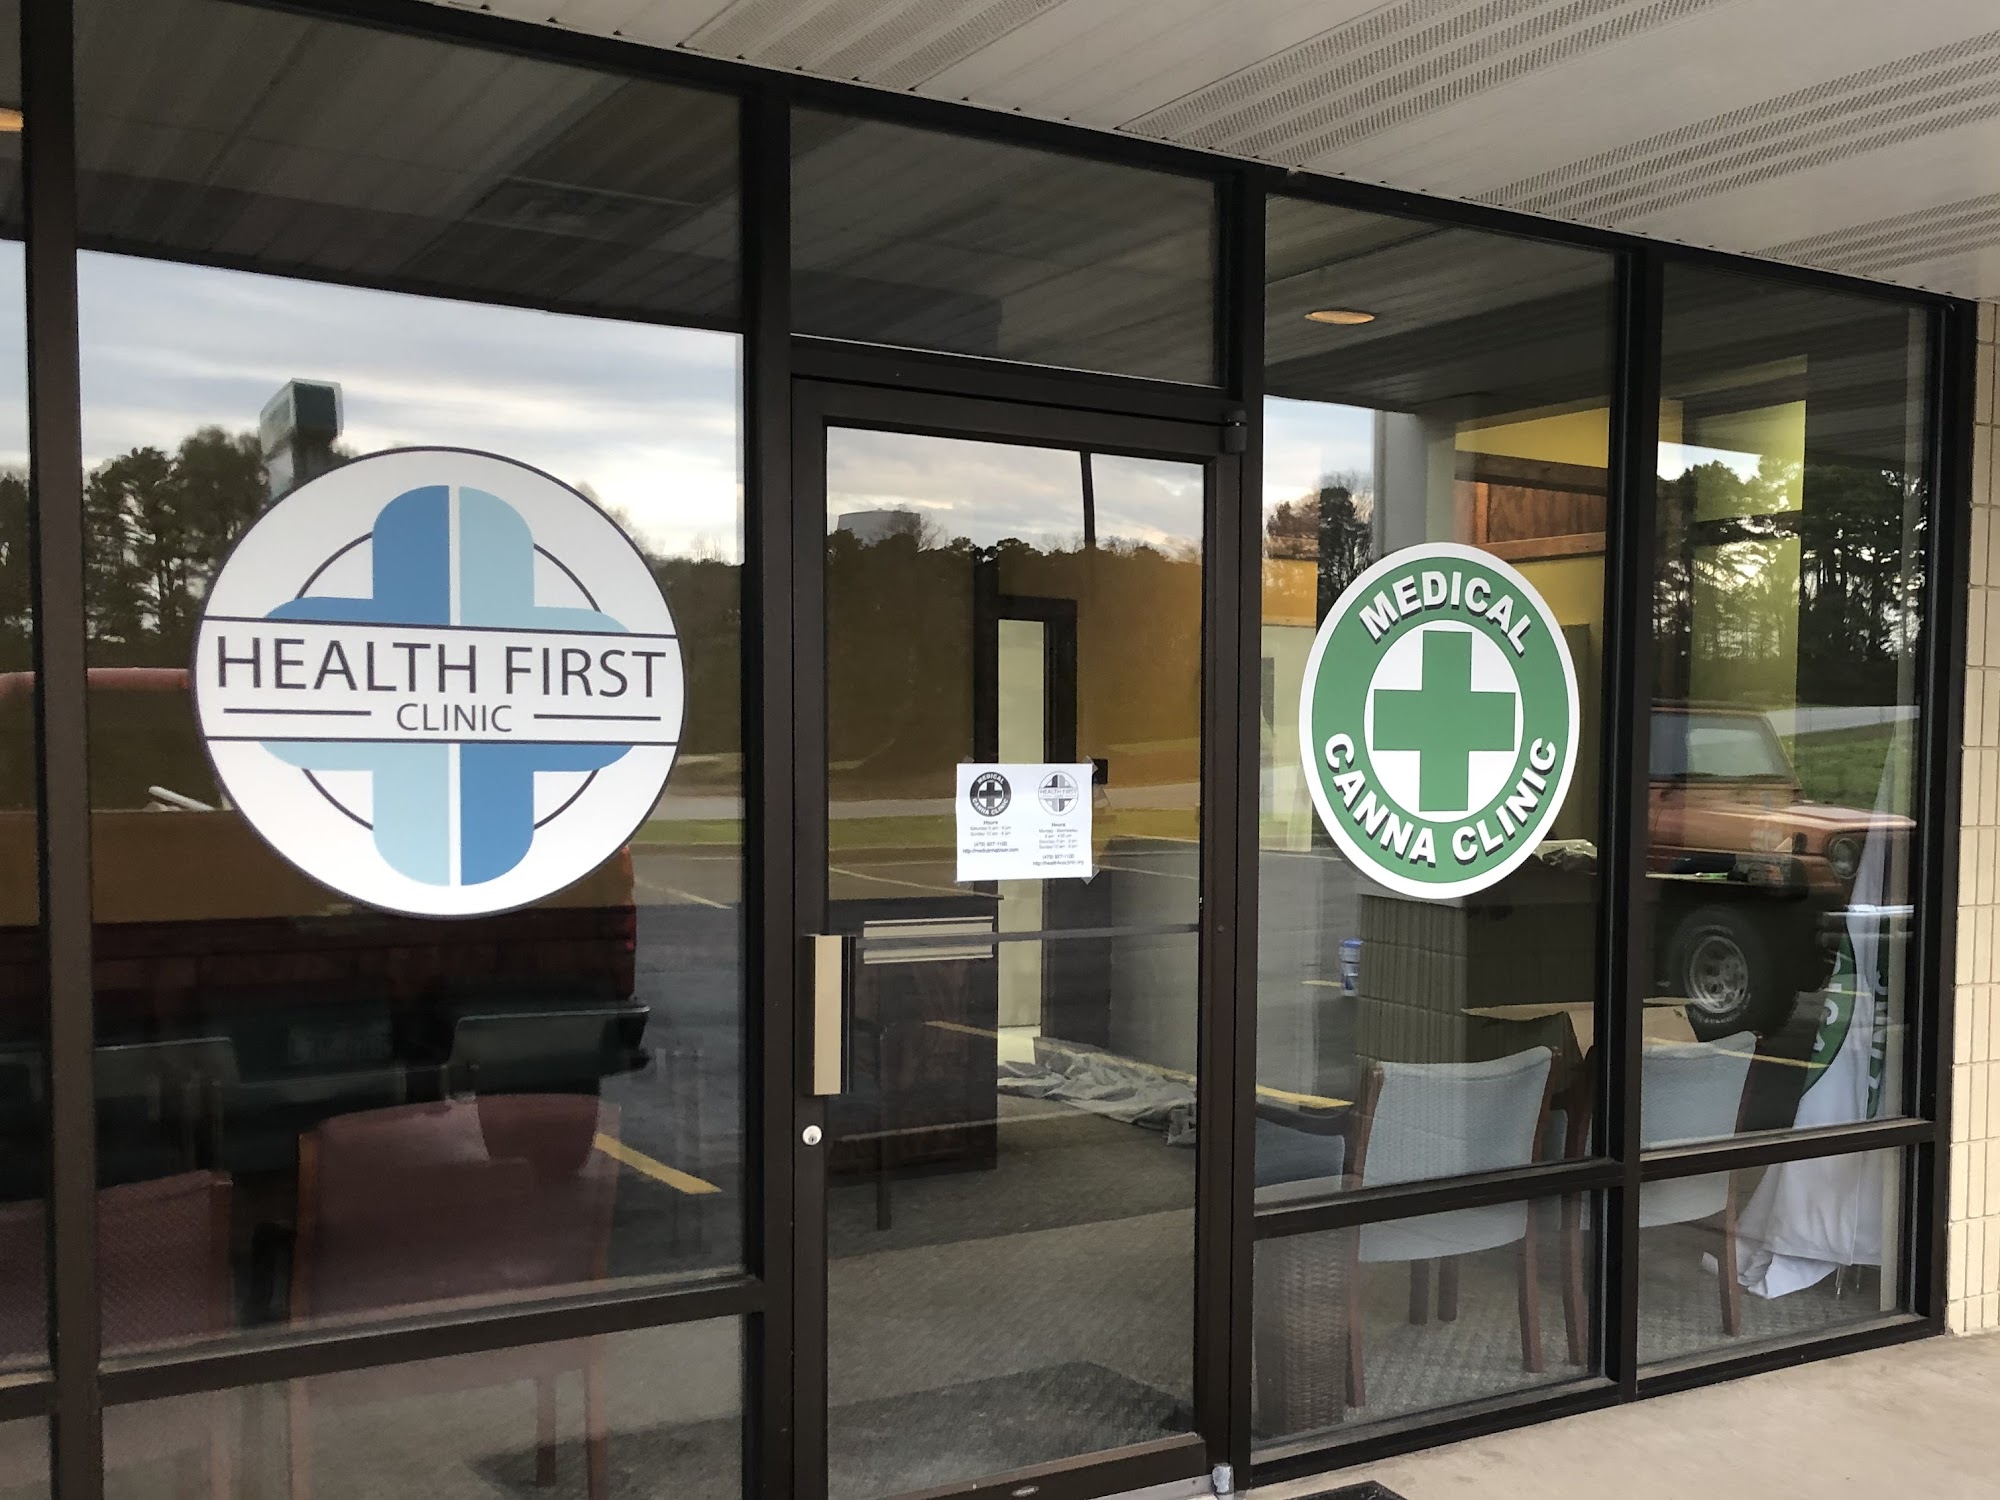 Health First Clinic